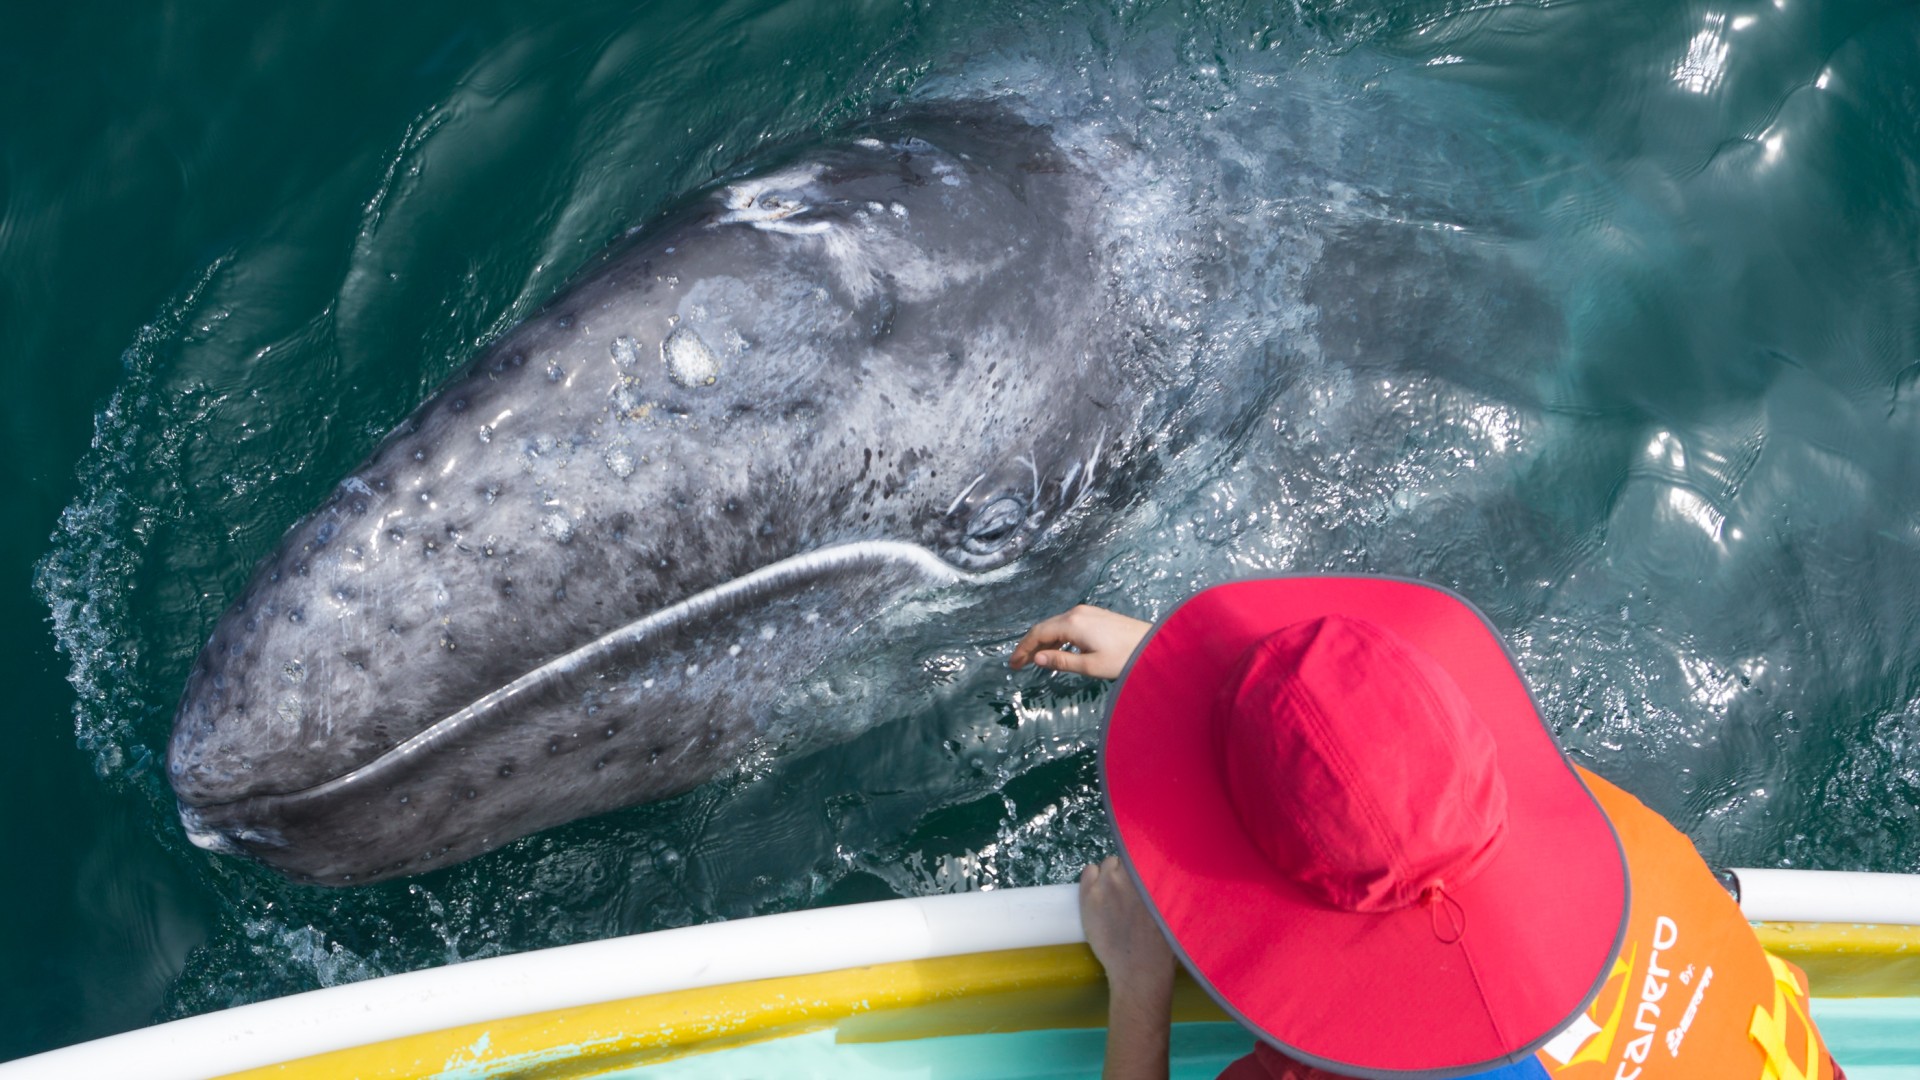 Person reaching out their hand to touch a friendly gray whale nudging their boat in Baja California Sur